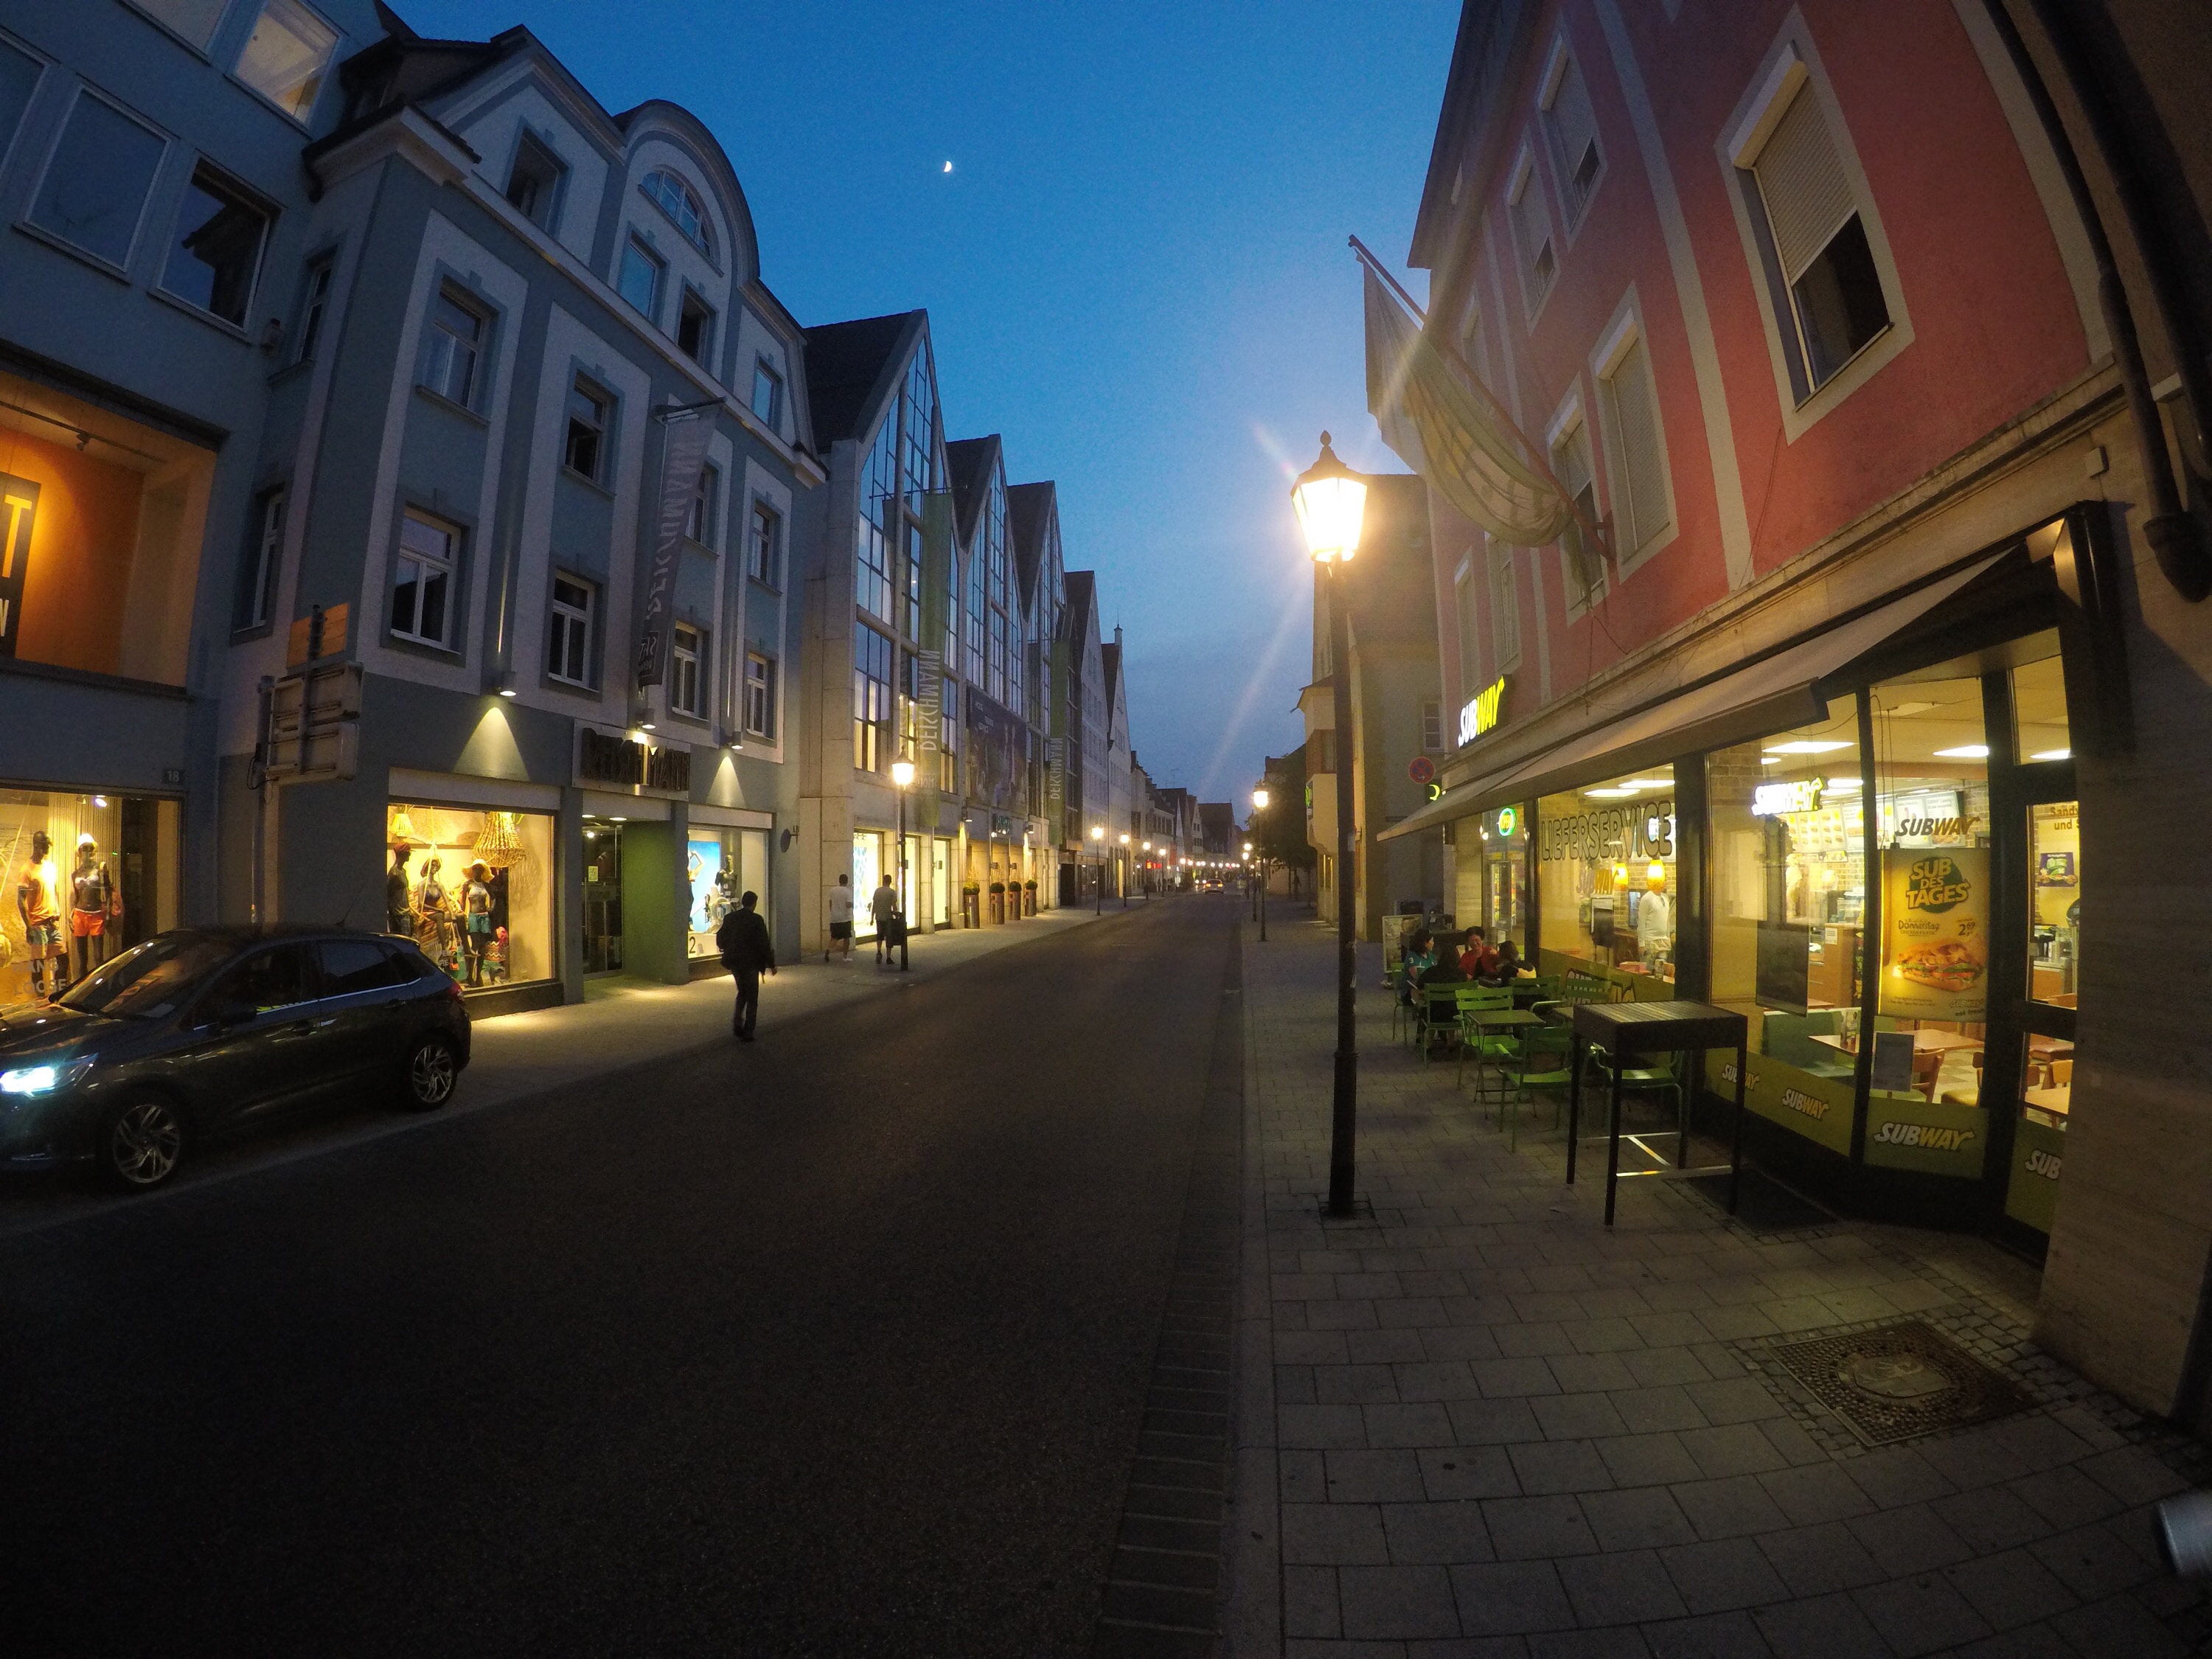 Exploring streets of Fussen, Germany